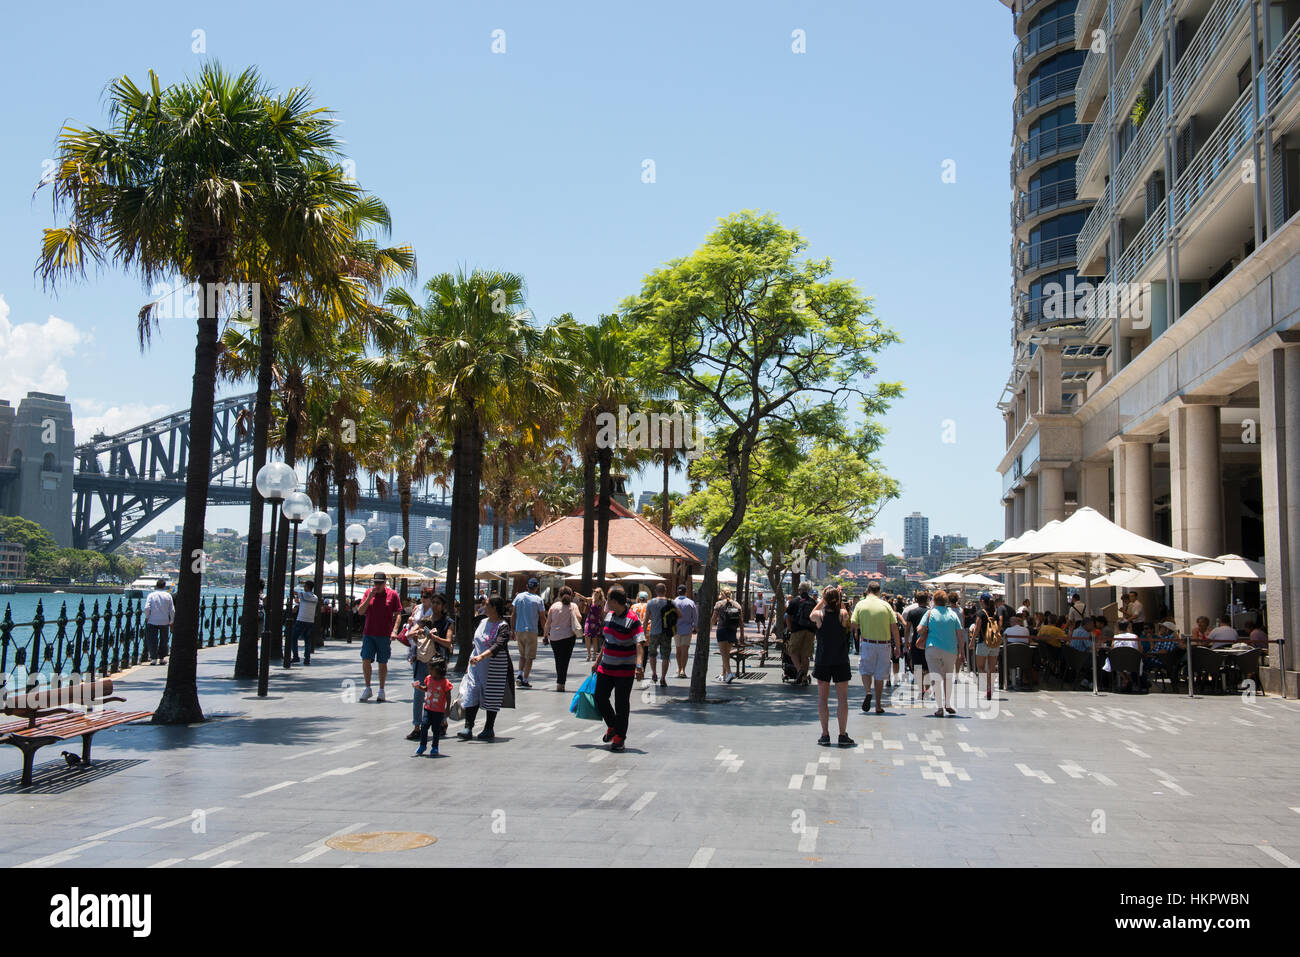 Summer day at Circular Quay in Sydney, New South Wales Australia Stock Photo